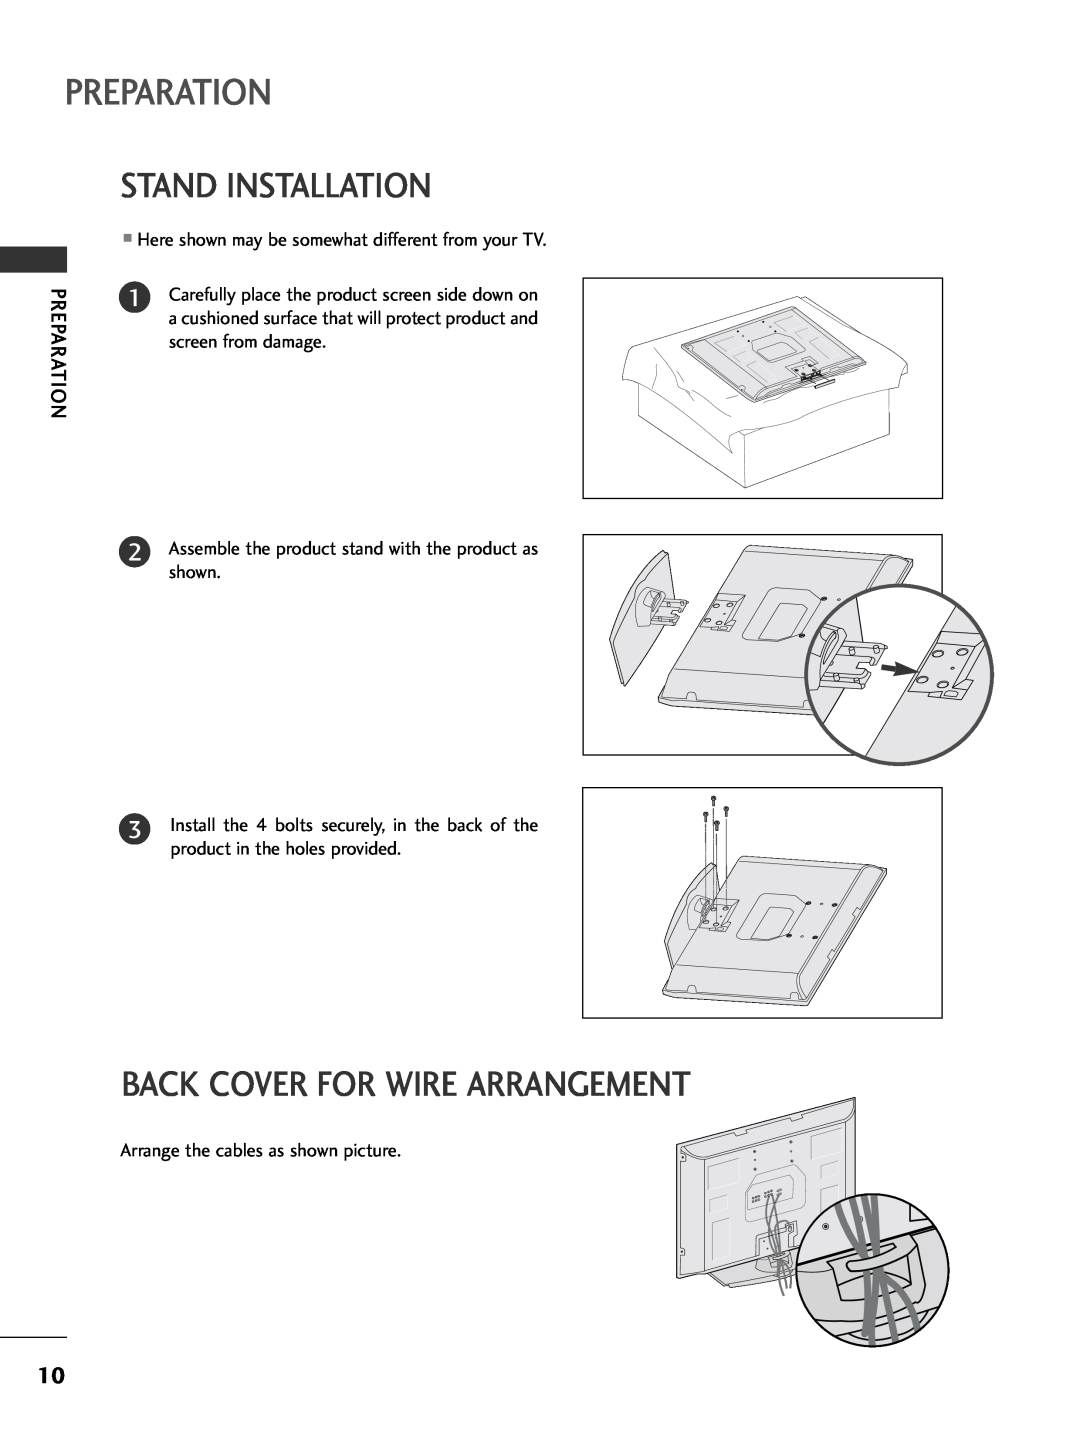 LG Electronics 32PC5DVC owner manual Stand Installation, Back Cover For Wire Arrangement, Preparation 